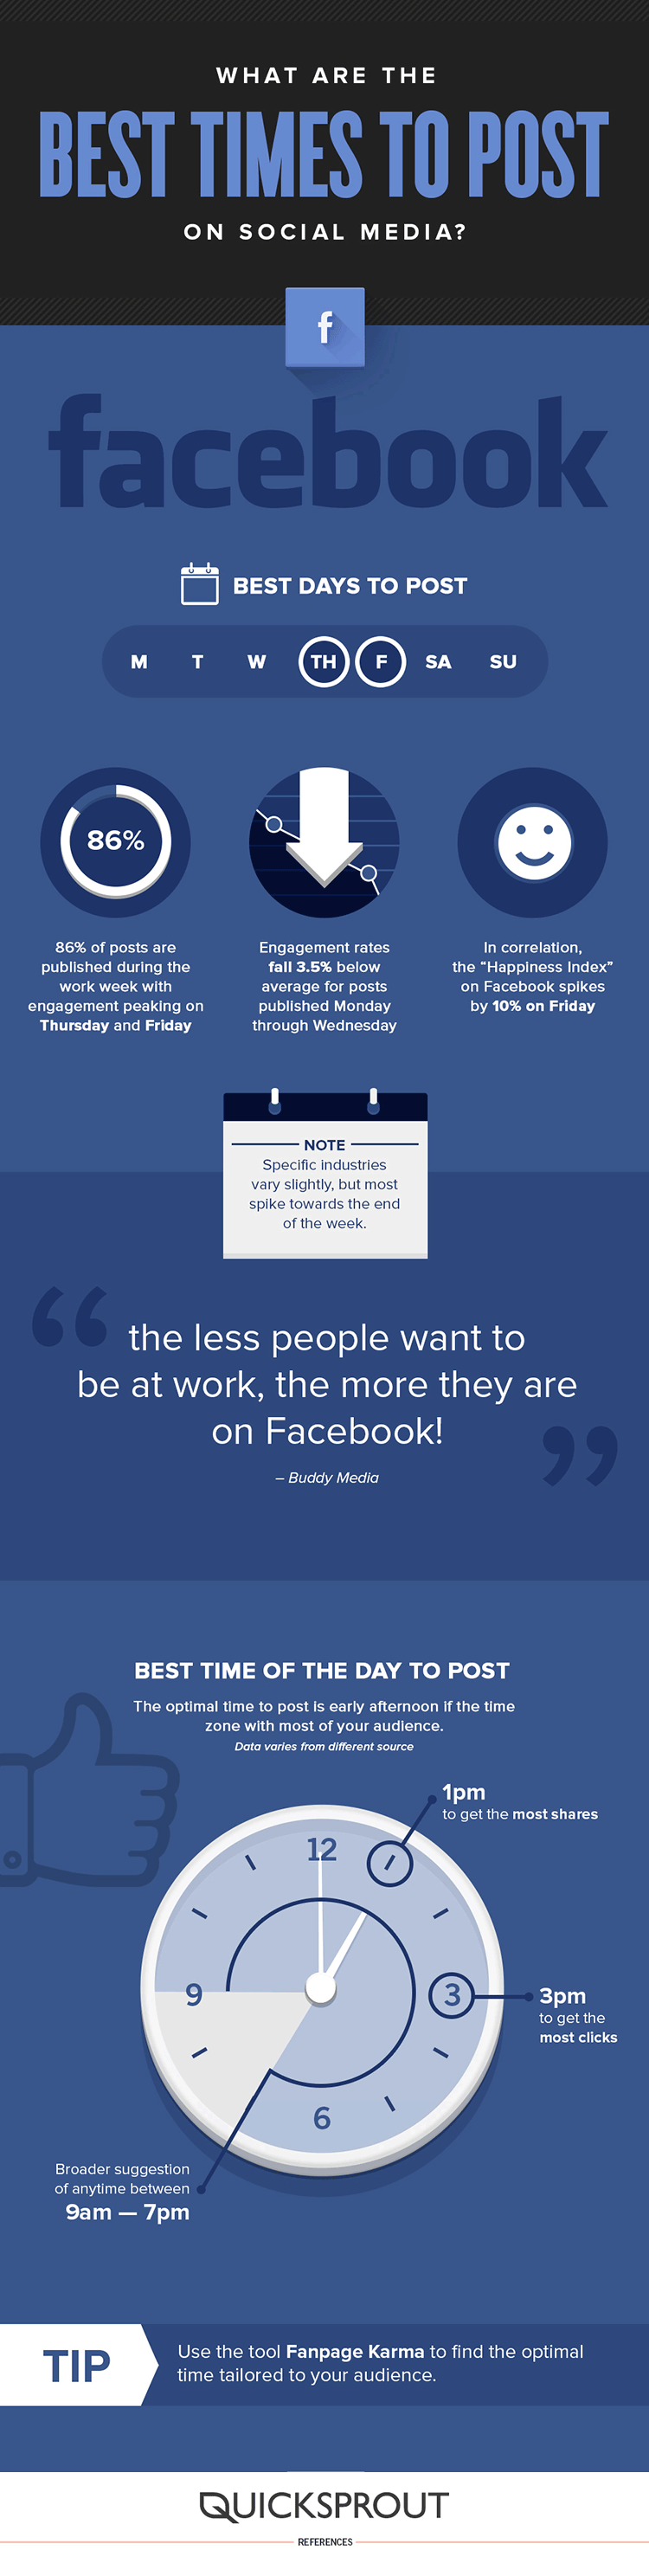 best time to post on Facebook infographic